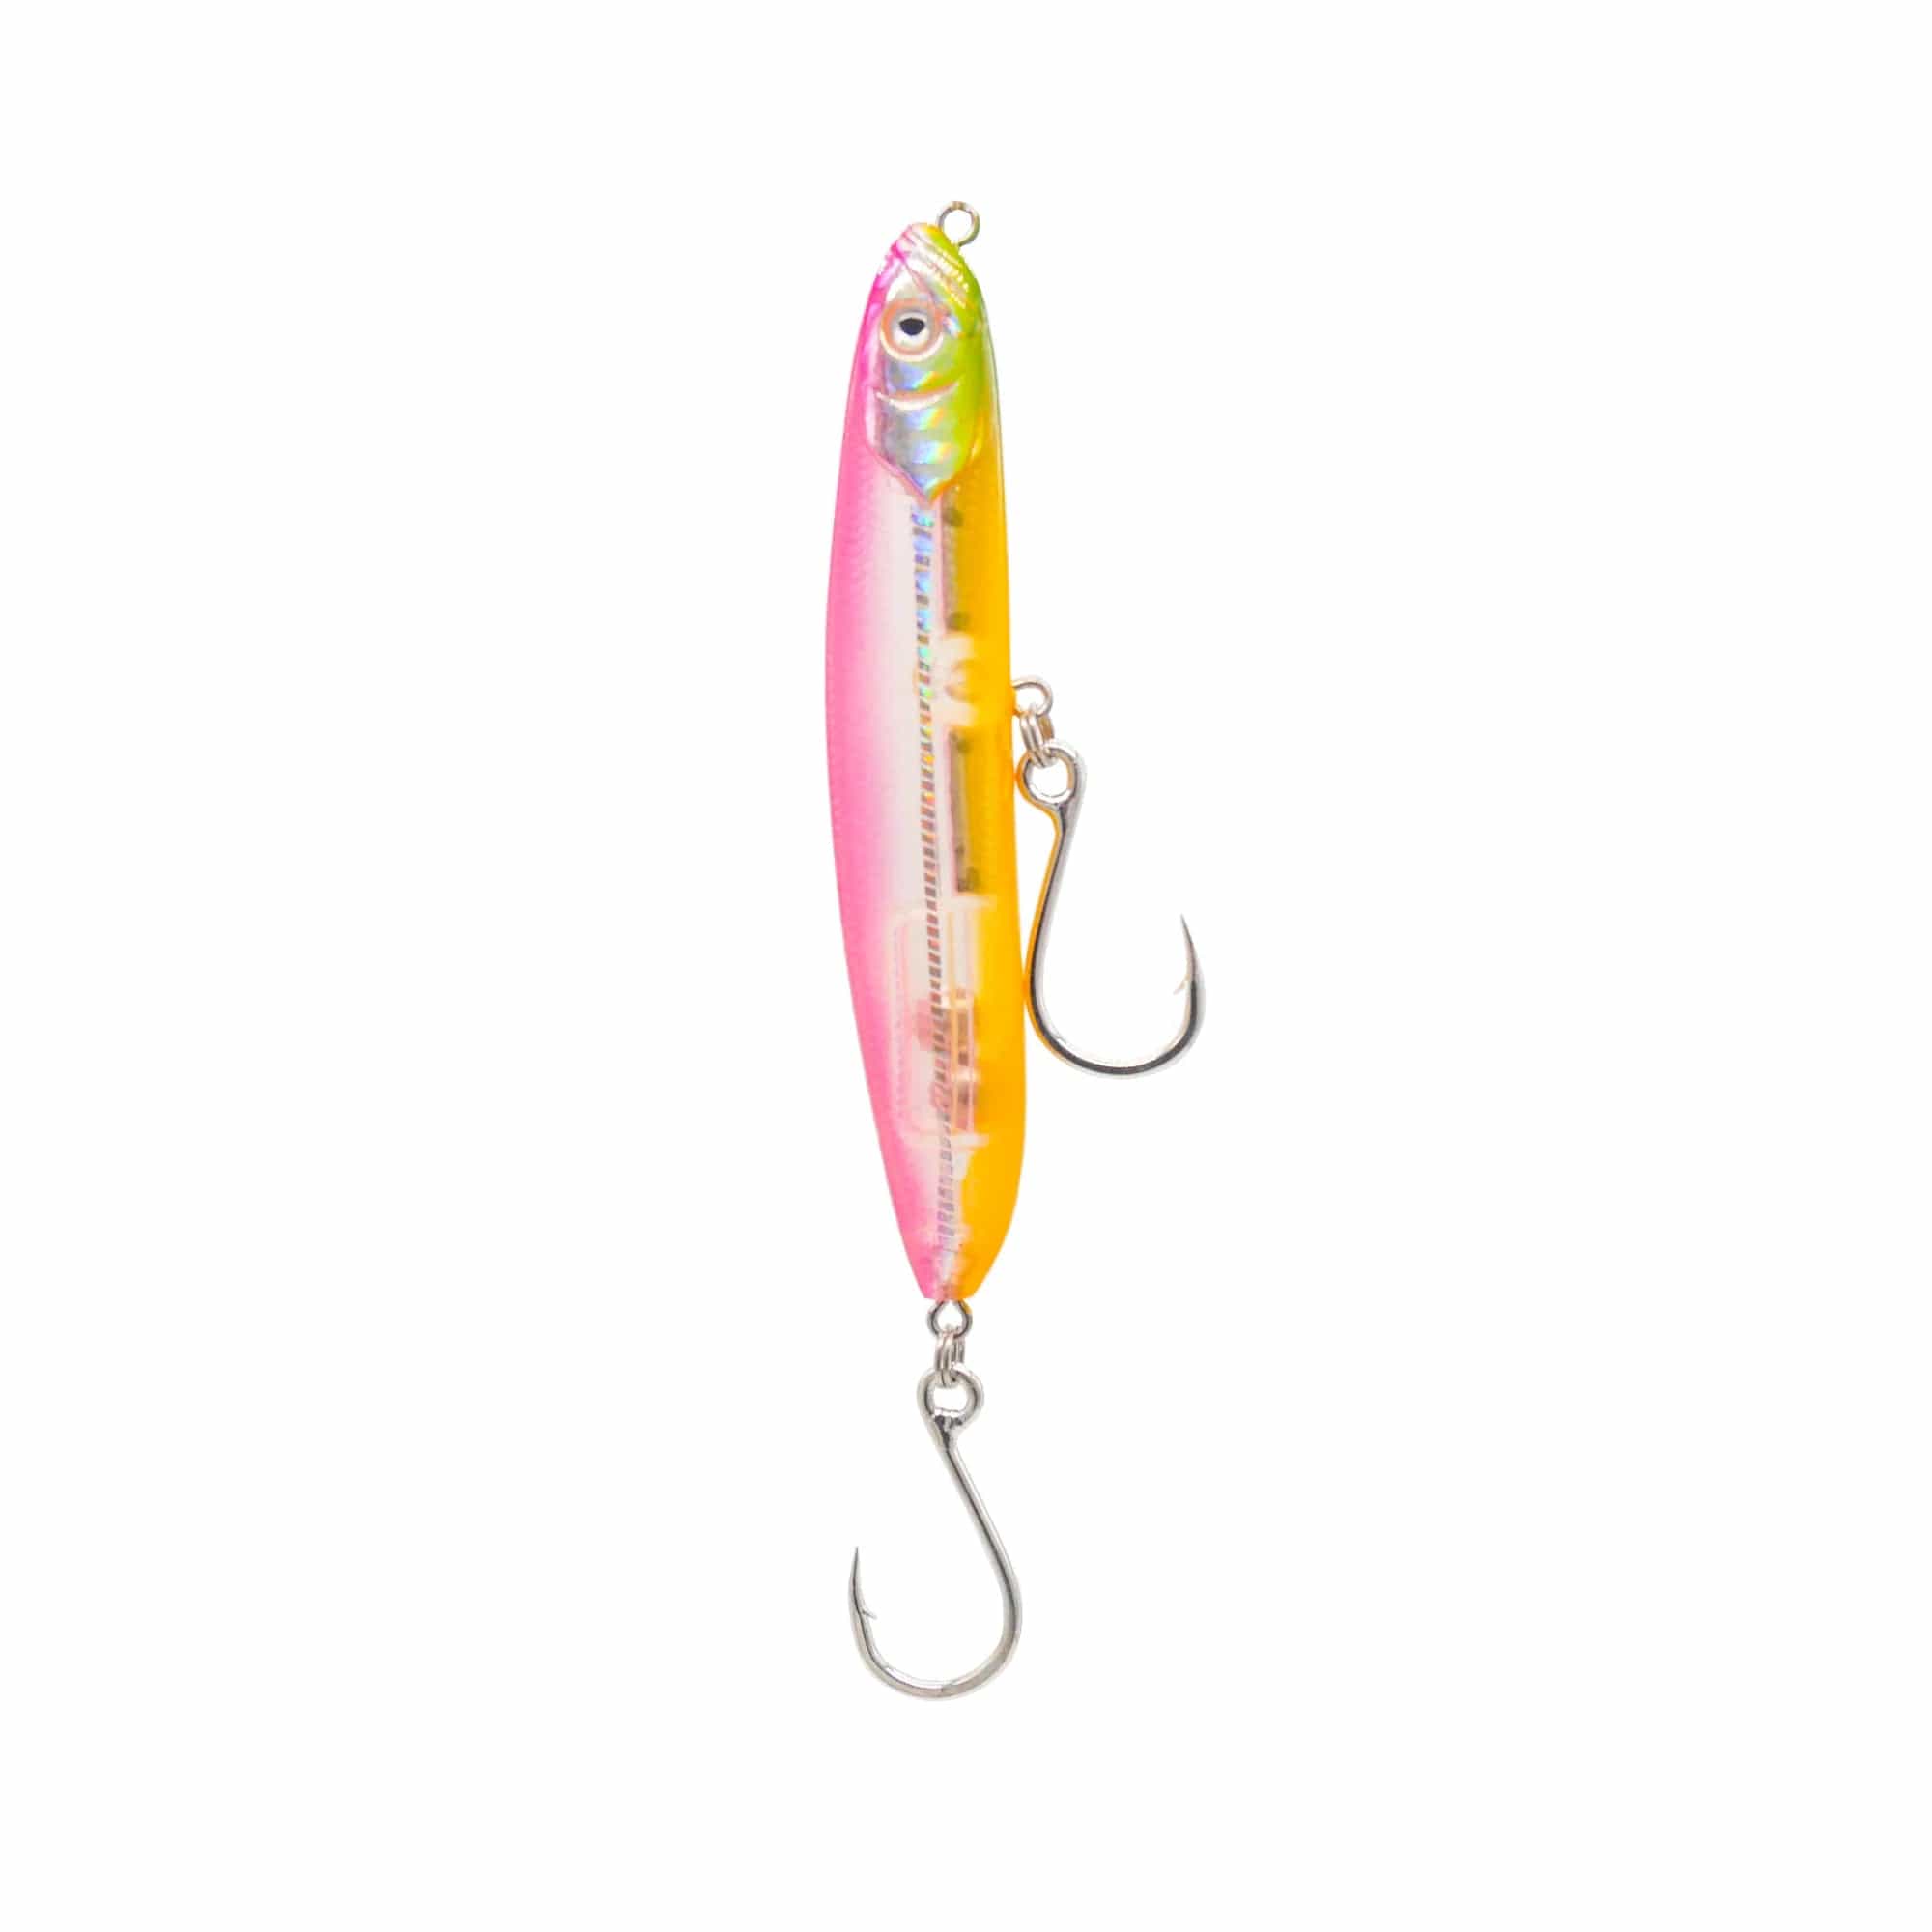 Minnow Hook Question? - Page 3